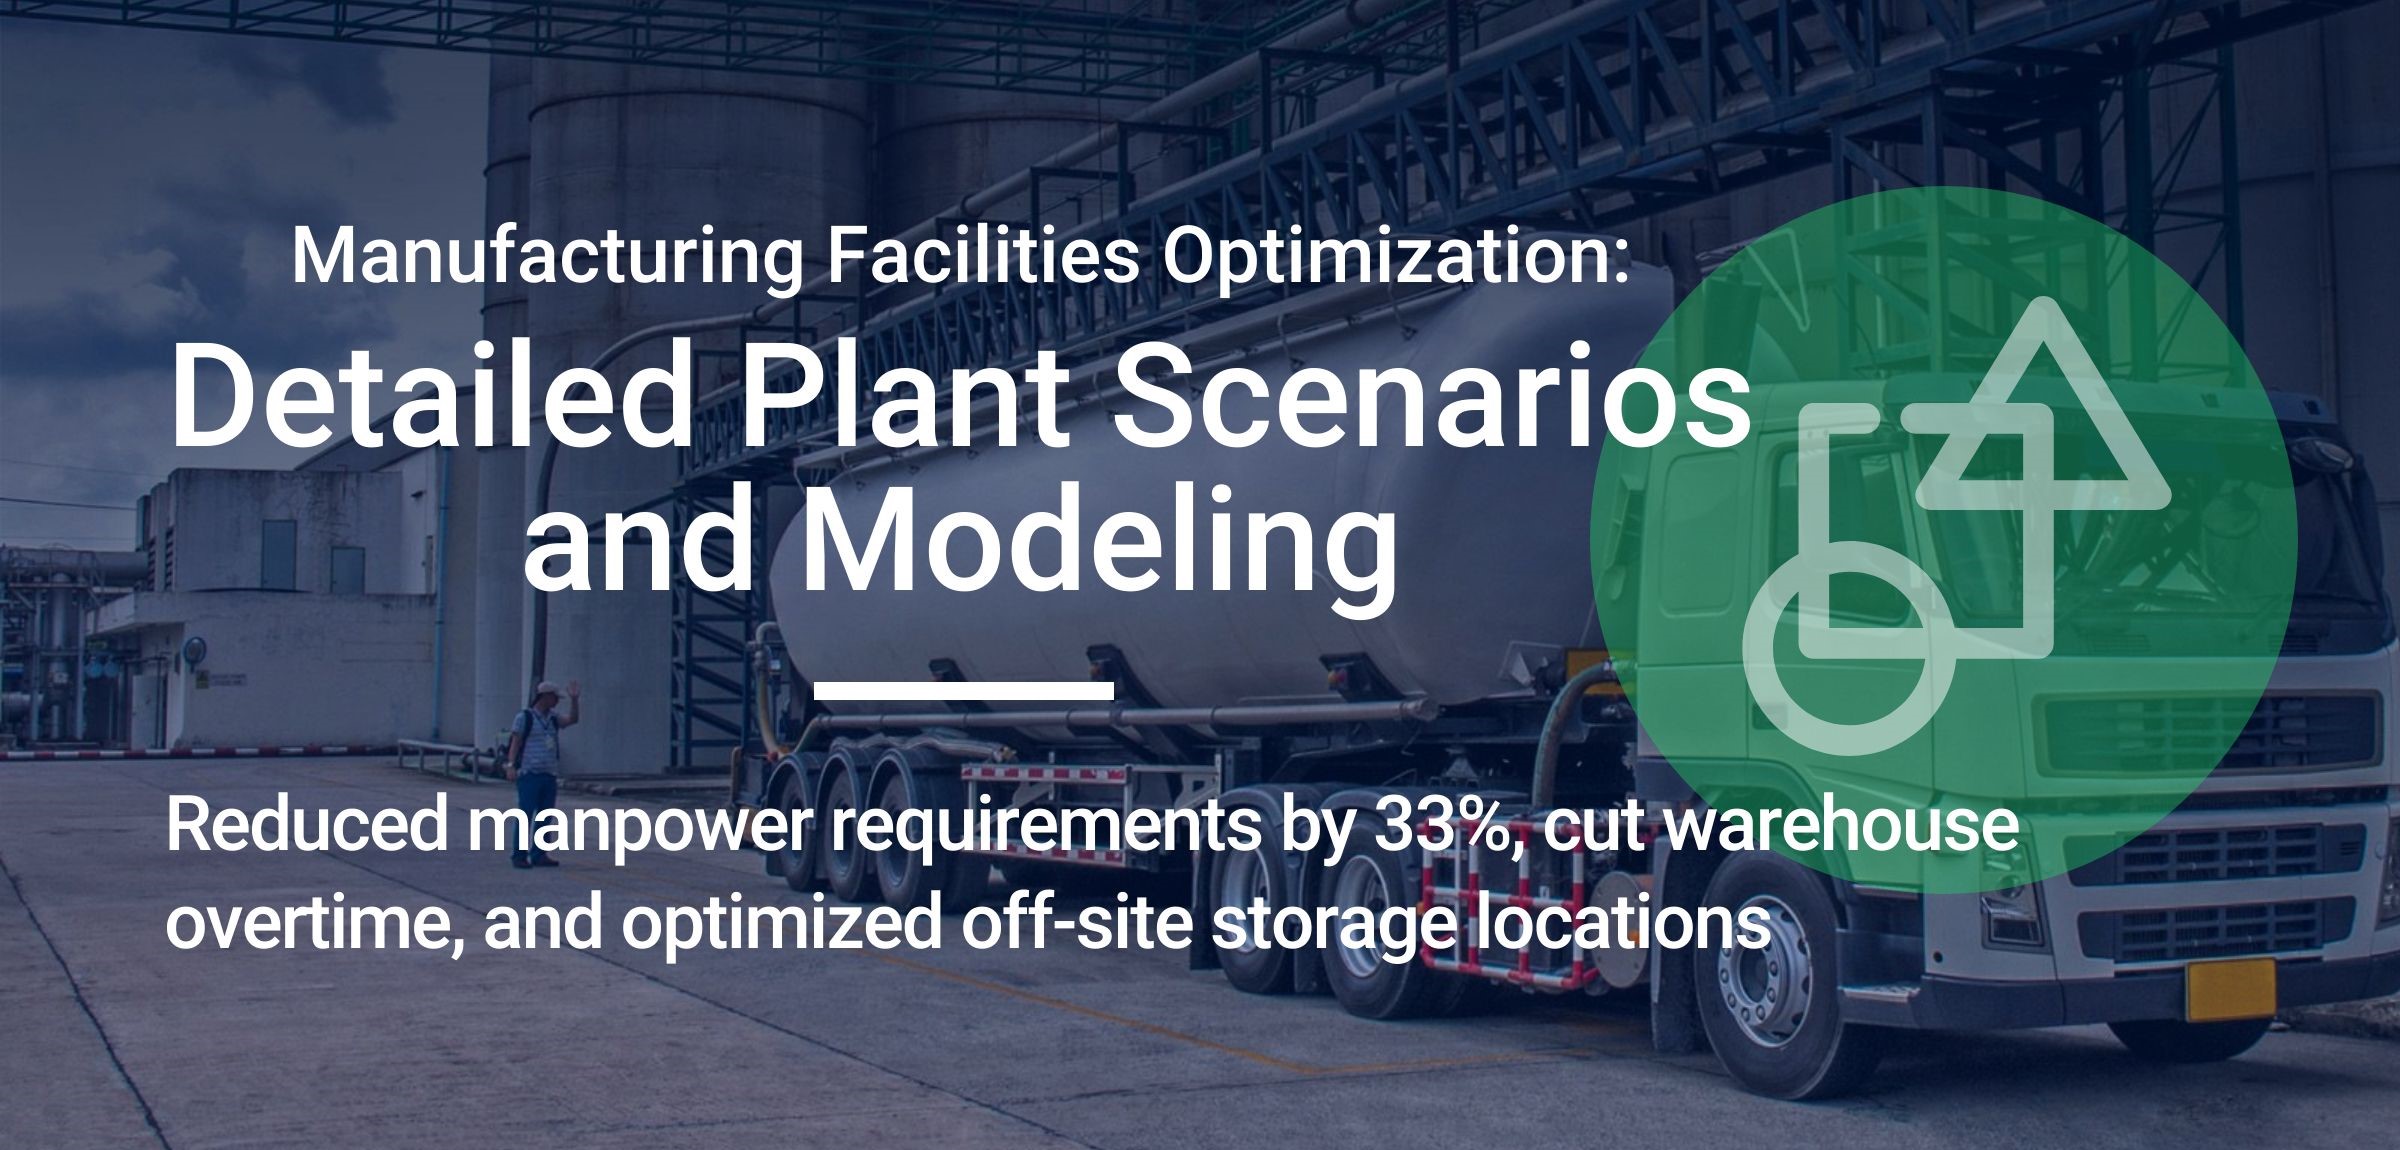 Manufacturing Facilities Optimization: Detailed Plant Scenarios and Modeling